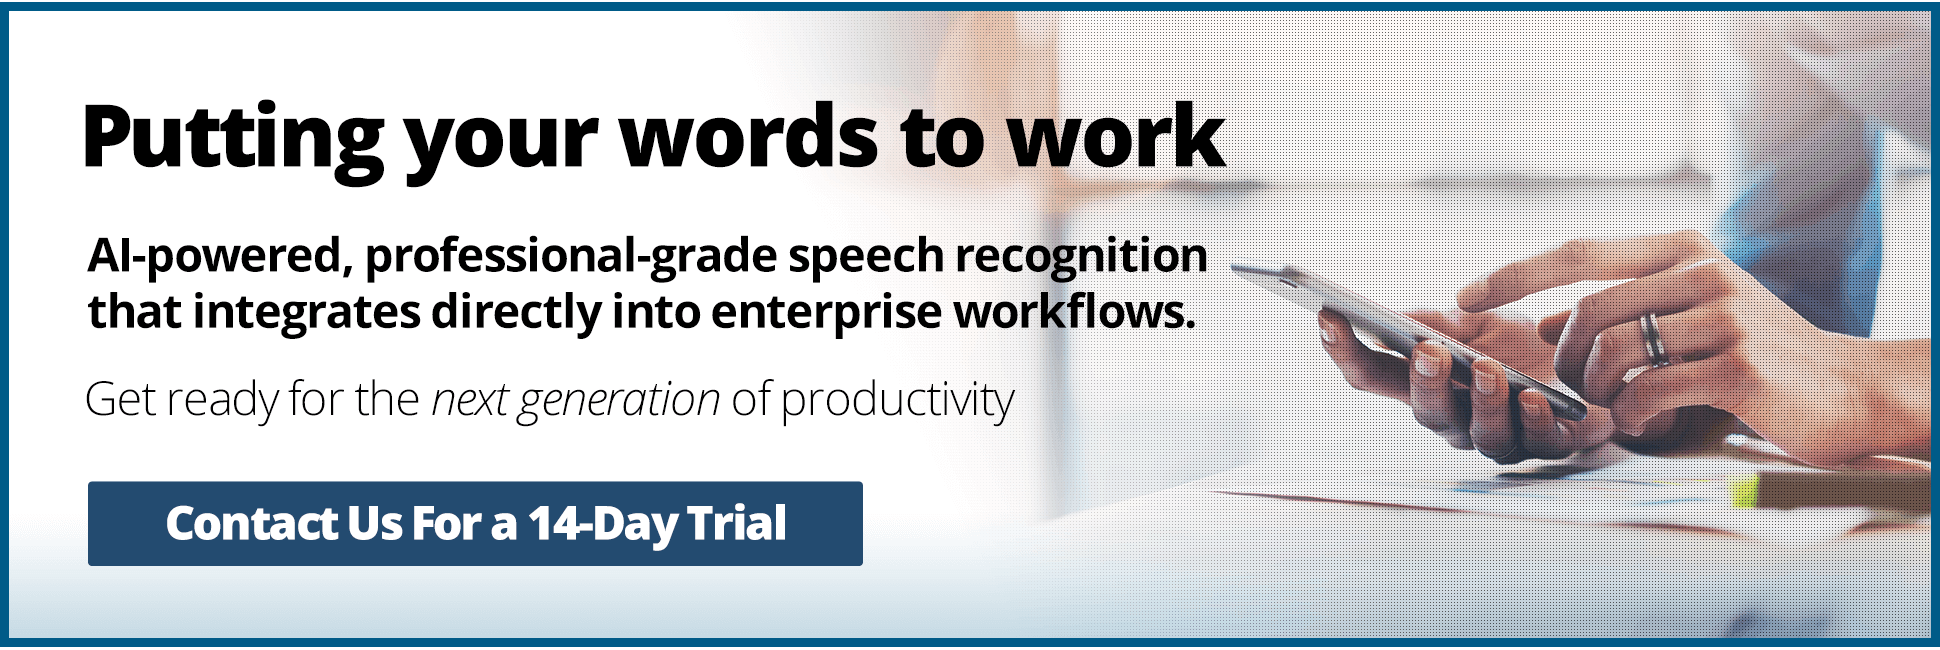 Putting your words to work. AI-powered, professional-grade speech recognition that integrates directly into enterprise workflows. Get ready for the next generation of productivity.